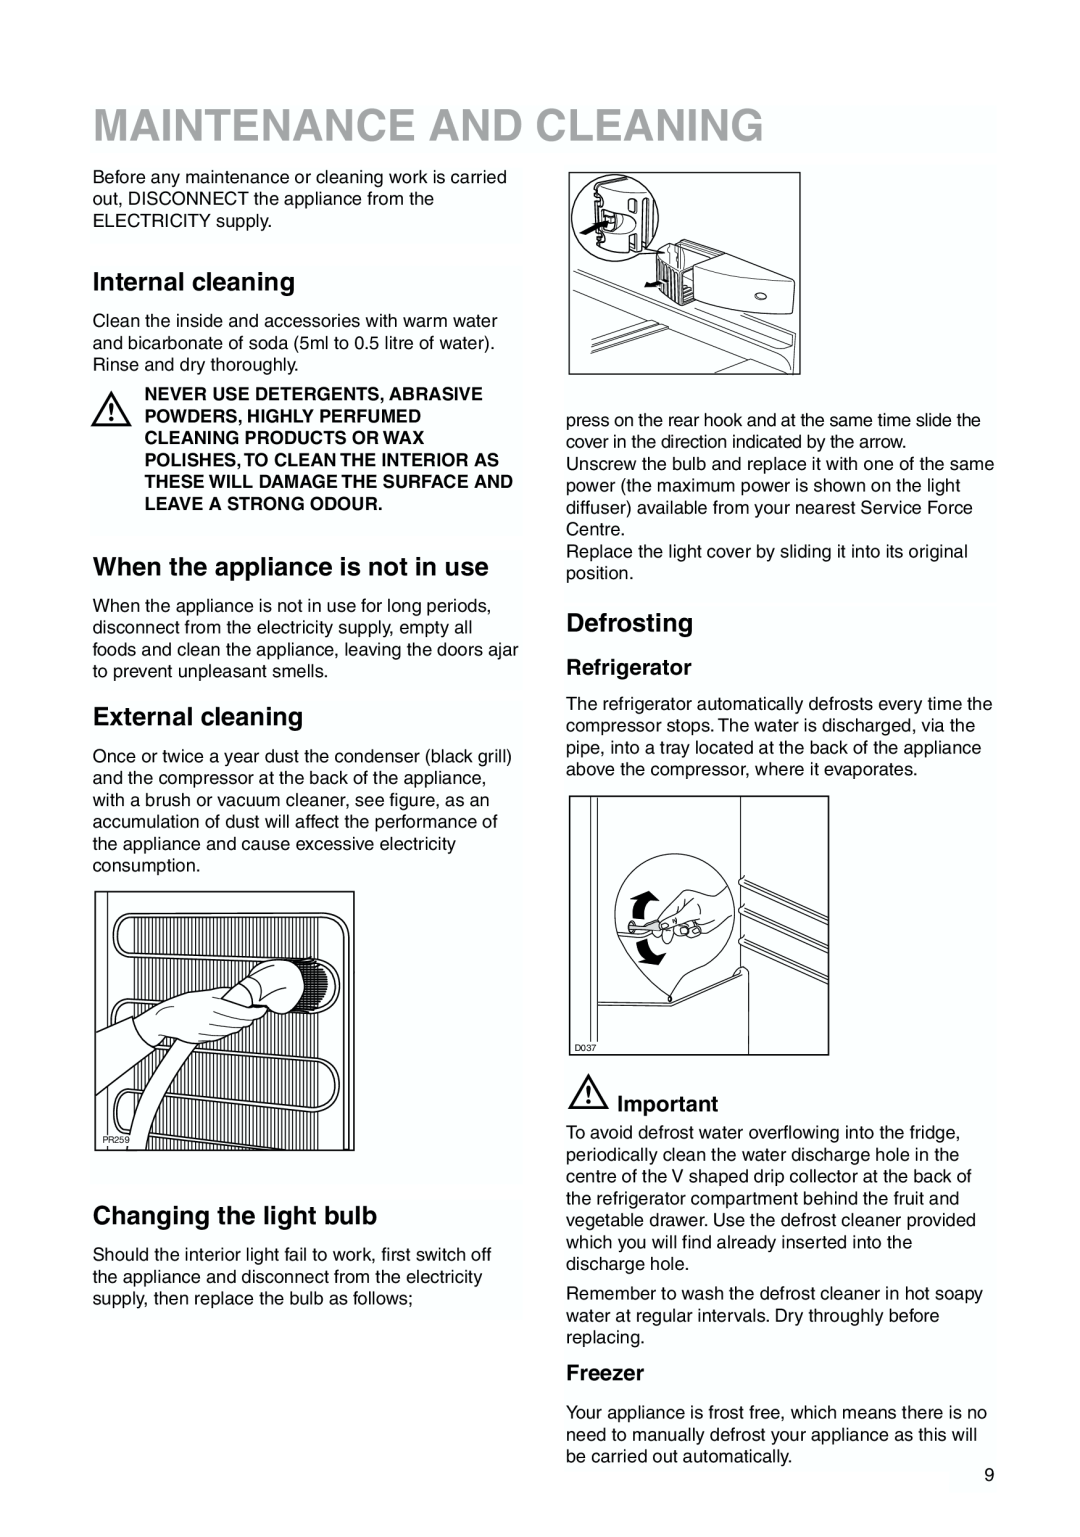 Zanussi ZBB6286 manual Maintenance And Cleaning, Internal cleaning, When the appliance is not in use, External cleaning 